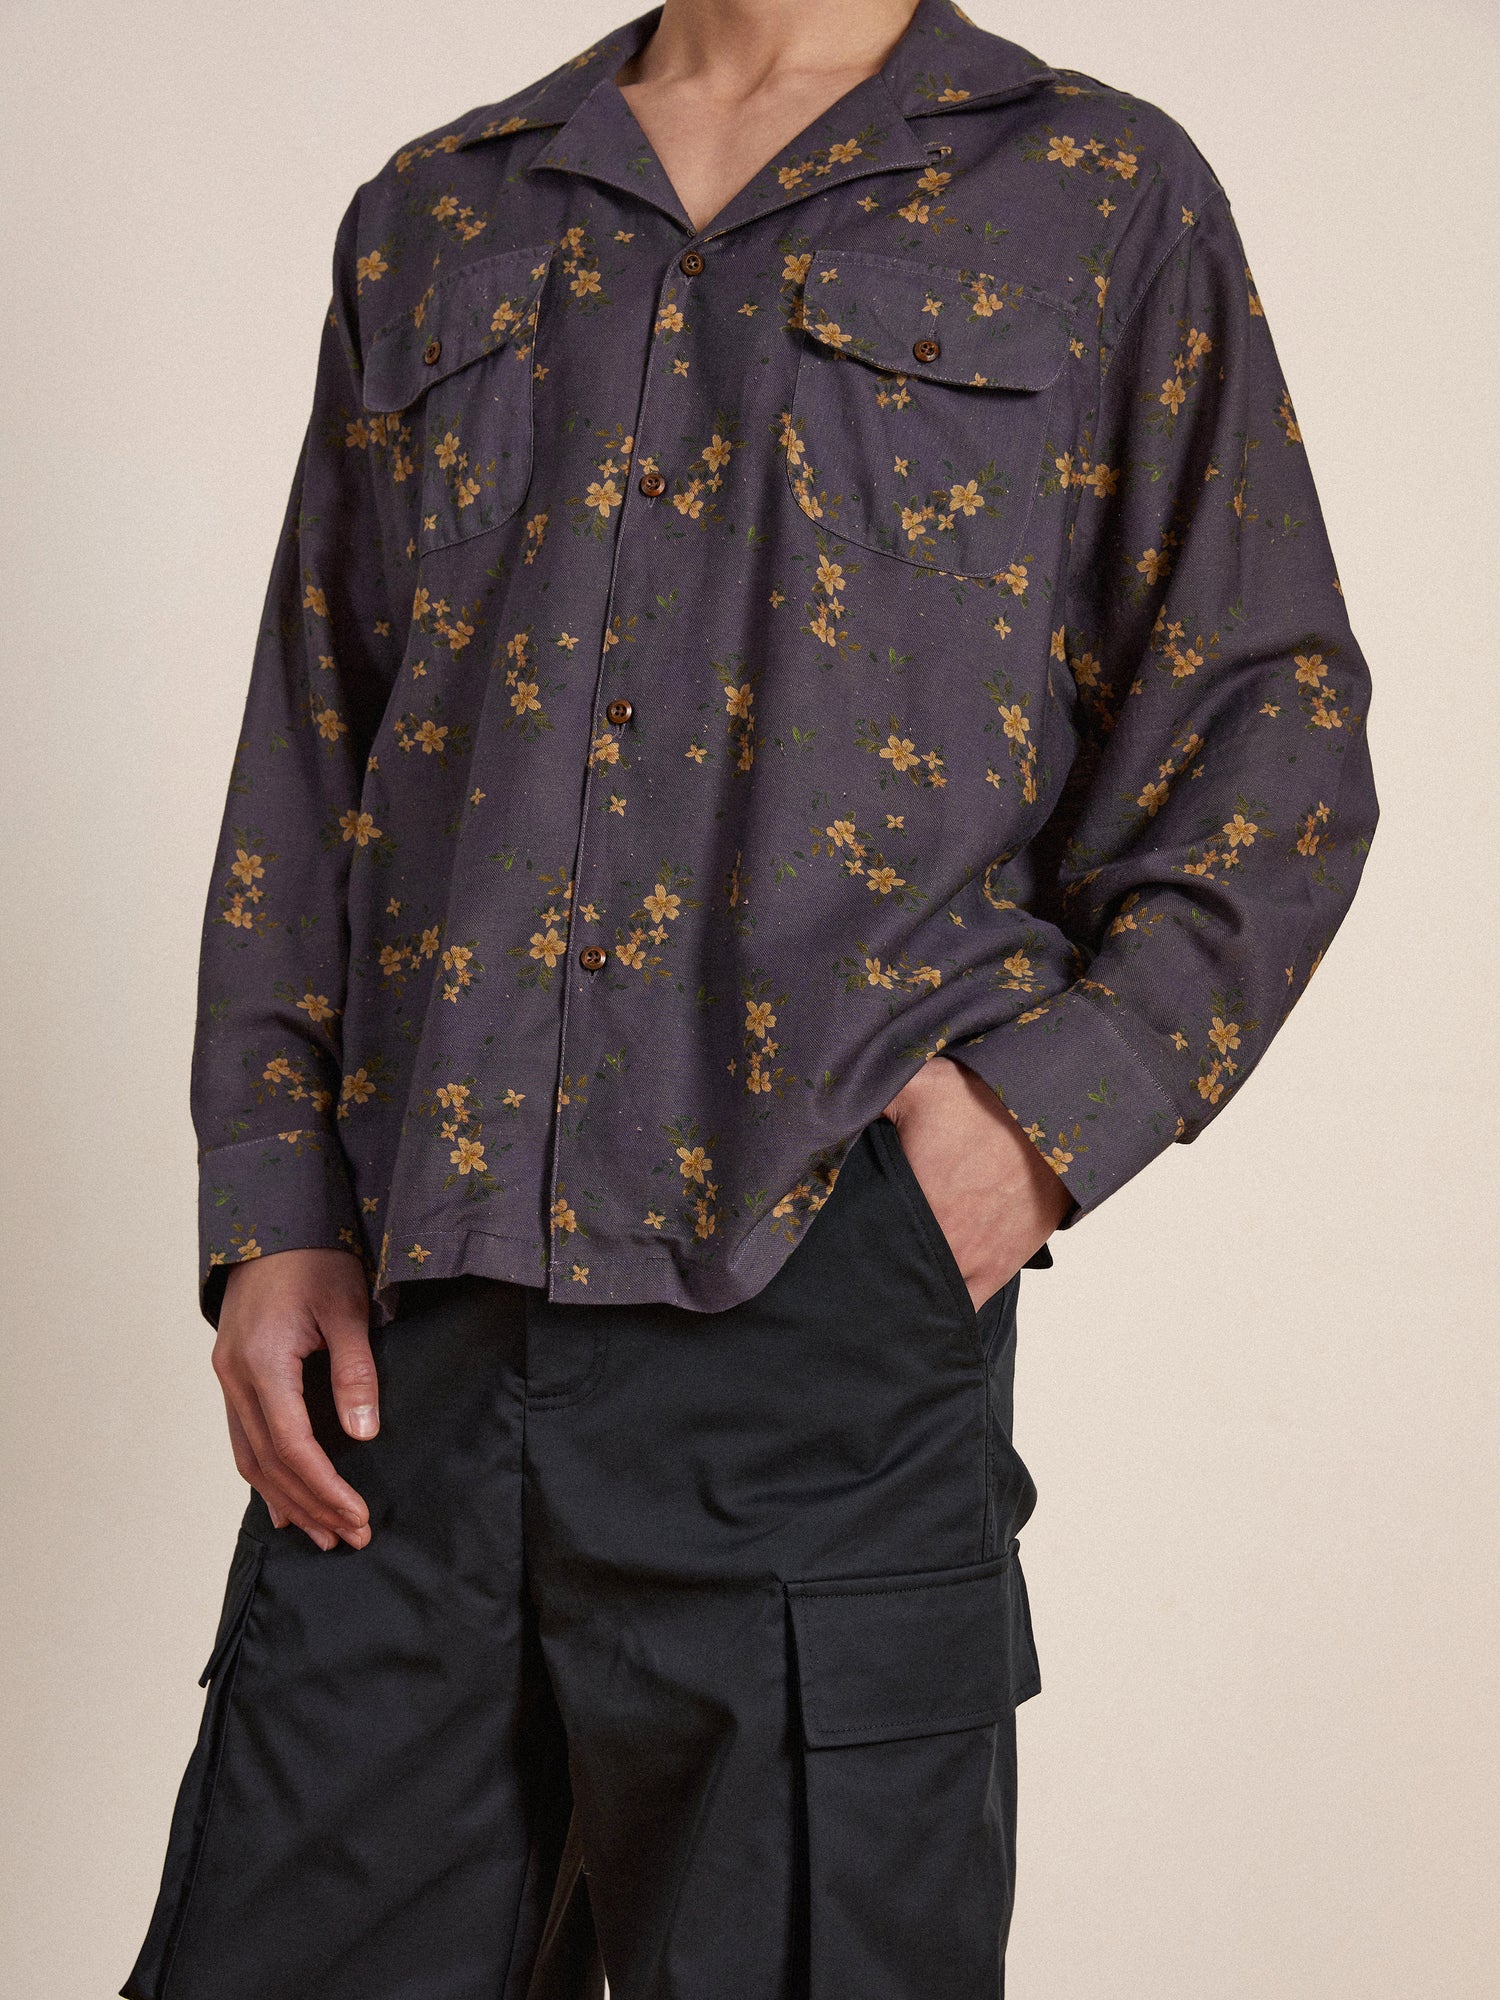 The model is wearing a Found Dusty LS Camp Shirt with flowers on it.